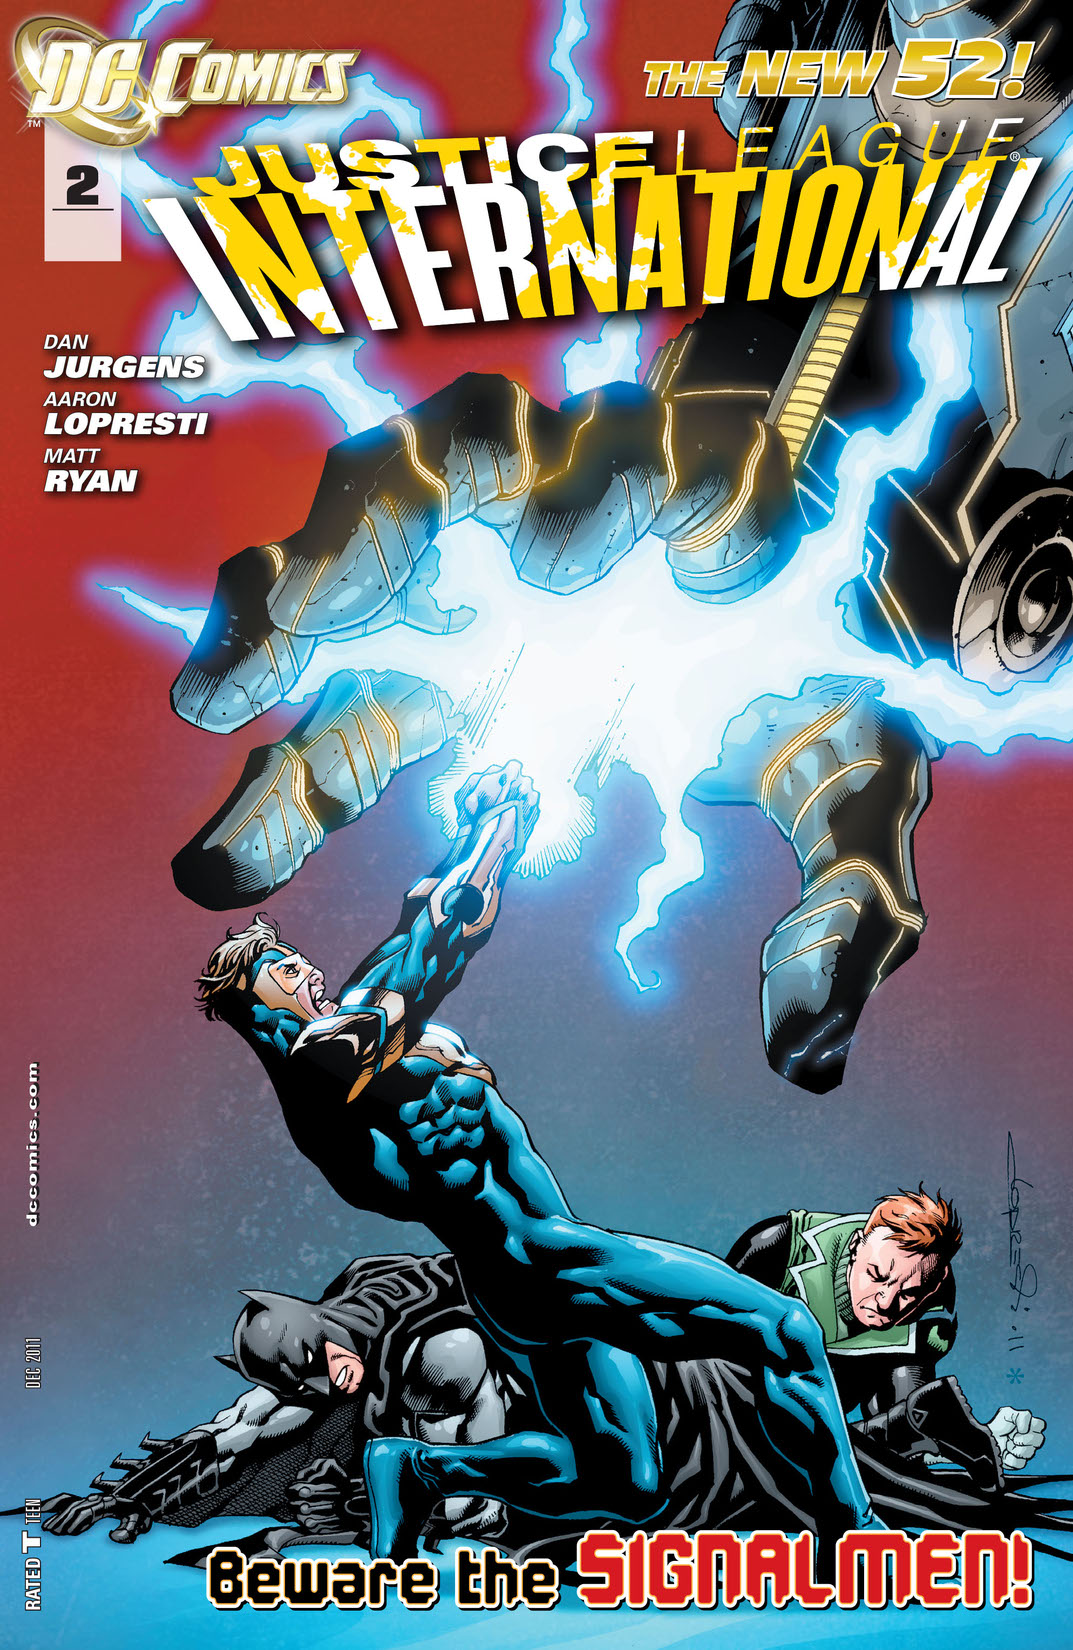 Justice League International #2 preview images